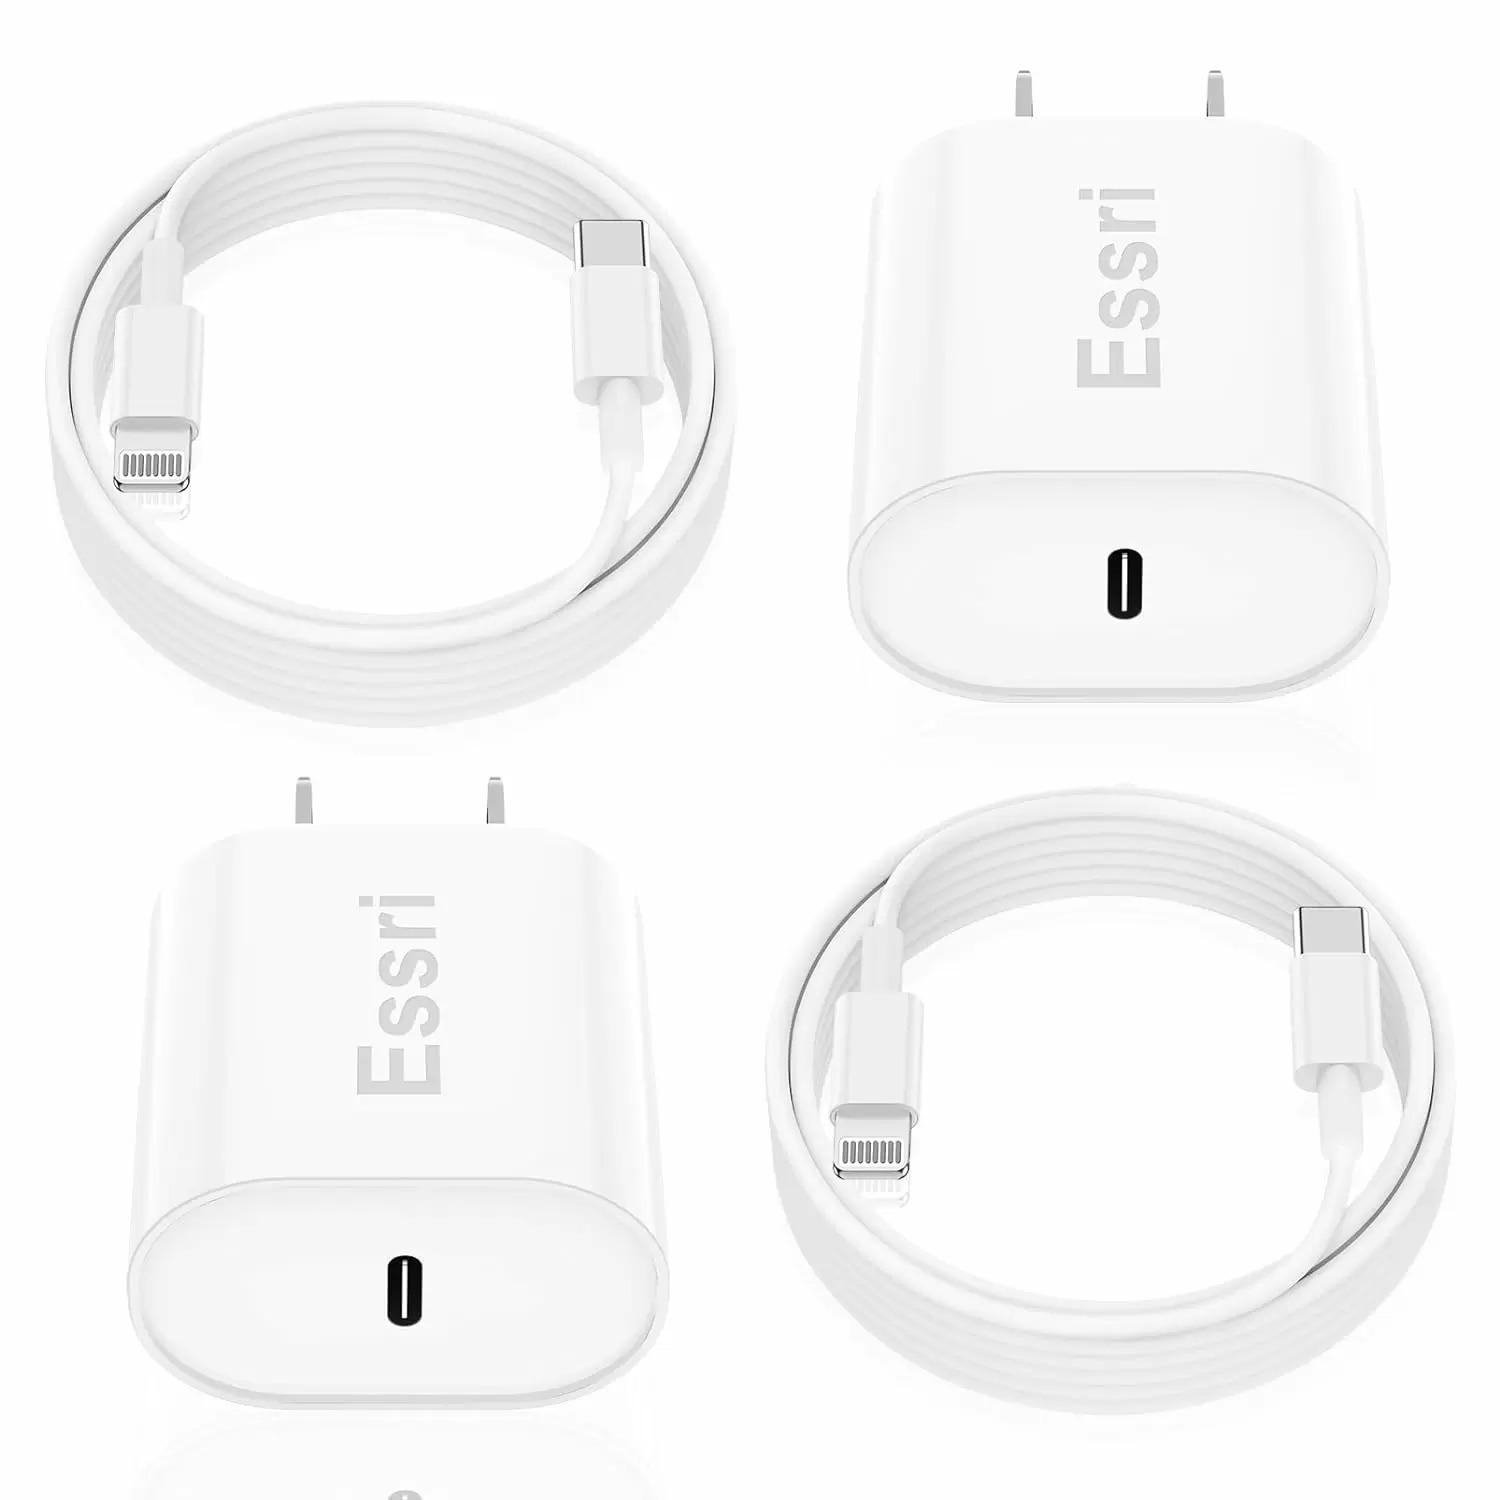 2 Pack of iPhone Charging USB-C Charging Cable and Block for $4.49